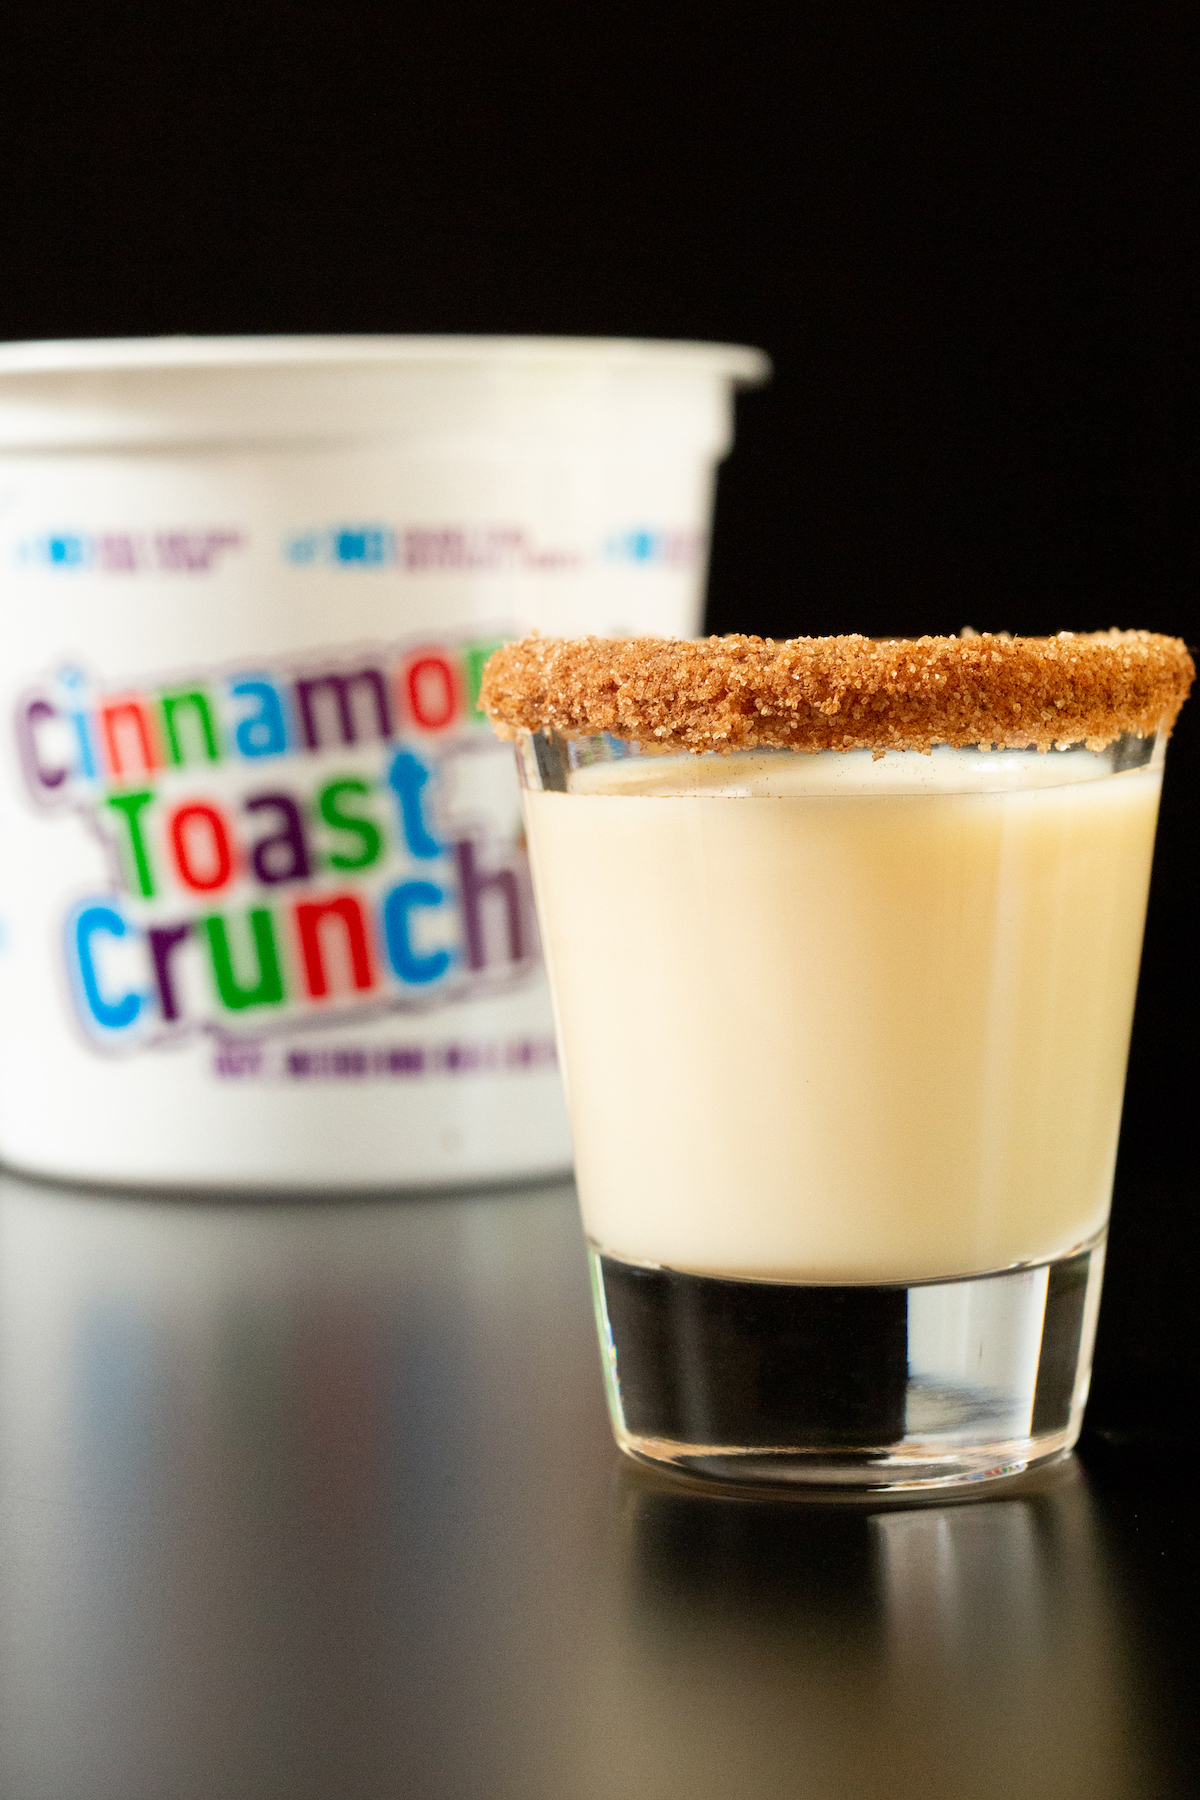 A single cinnamon toast crunch shot with cinnamon sugar rim in front of a container of the cereal.